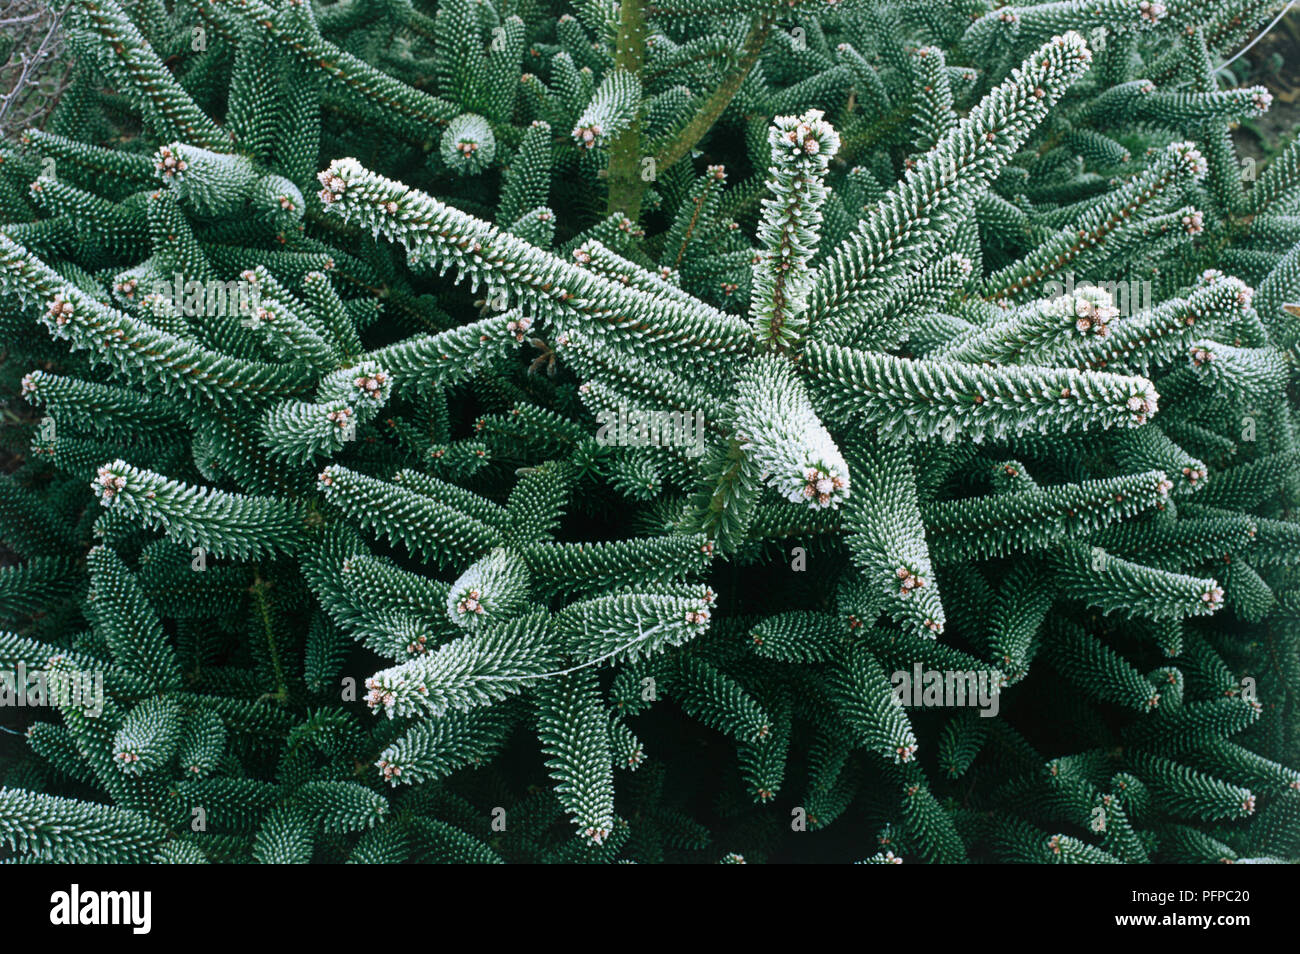 Abies pinsapo 'Glauca', small fir tree showing linear bluish green leaves  arranged radially around each shoot and covered with snow Stock Photo -  Alamy